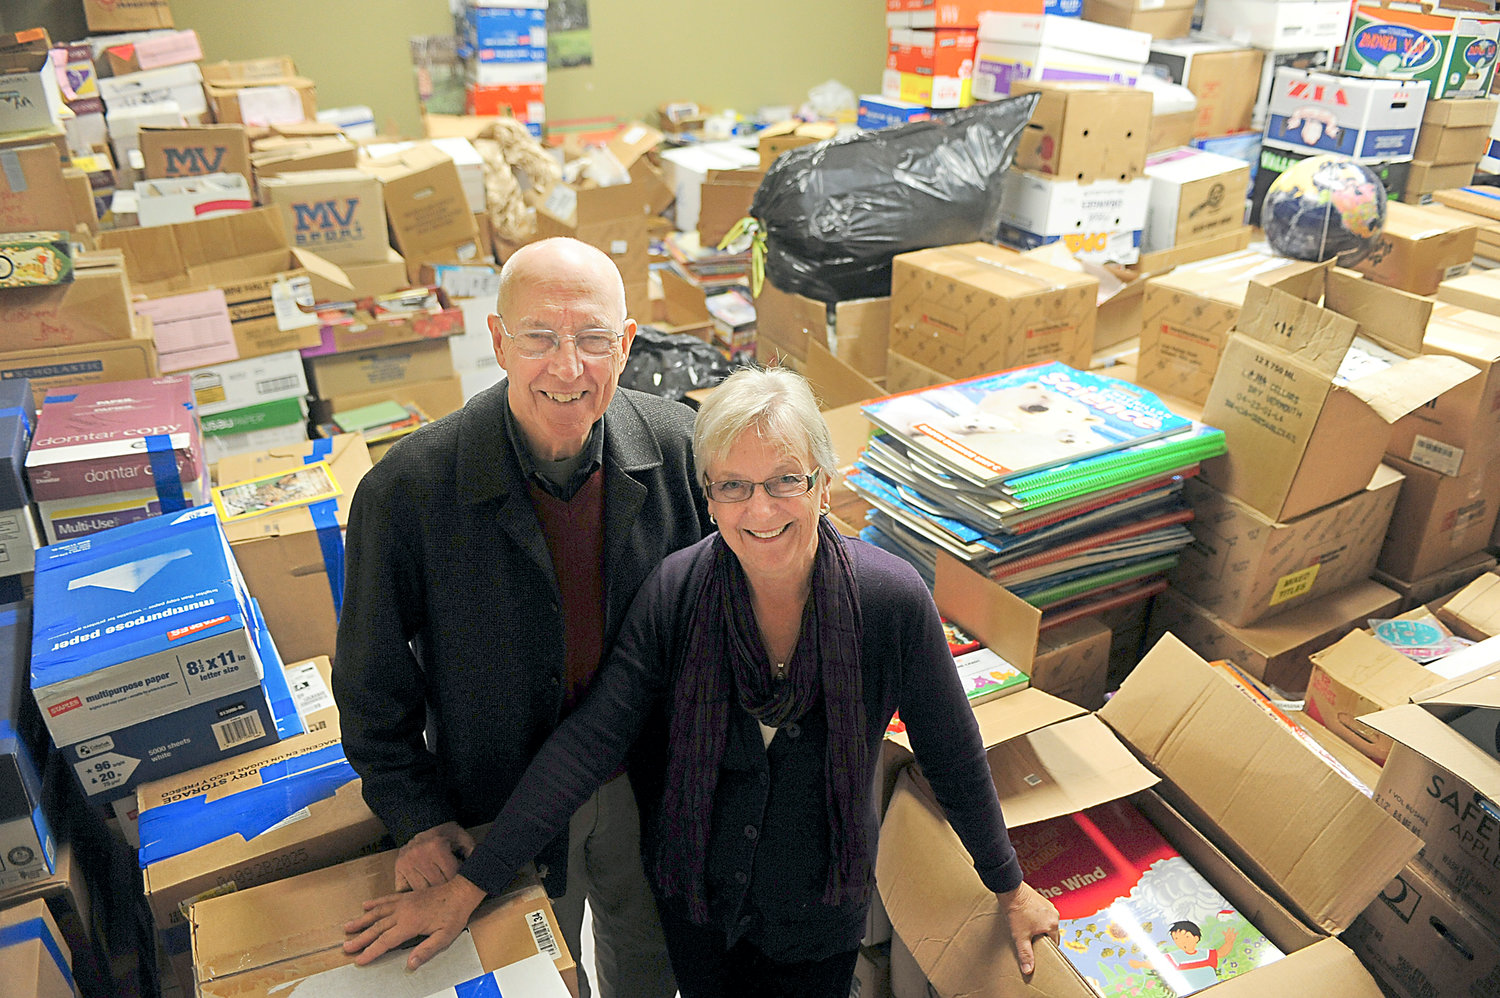 Dr. Larry Hull and his wife, Aarlie, pose for a portrait inside a unit at the Tower Plaza on Friday in Centralia. The Centralia couple have collected thousands of books which they send to libraries in developing countries such as Papua New Guinea. In honor of their years of humanitarian service, the Hulls are being given this year's Evergreen Award.